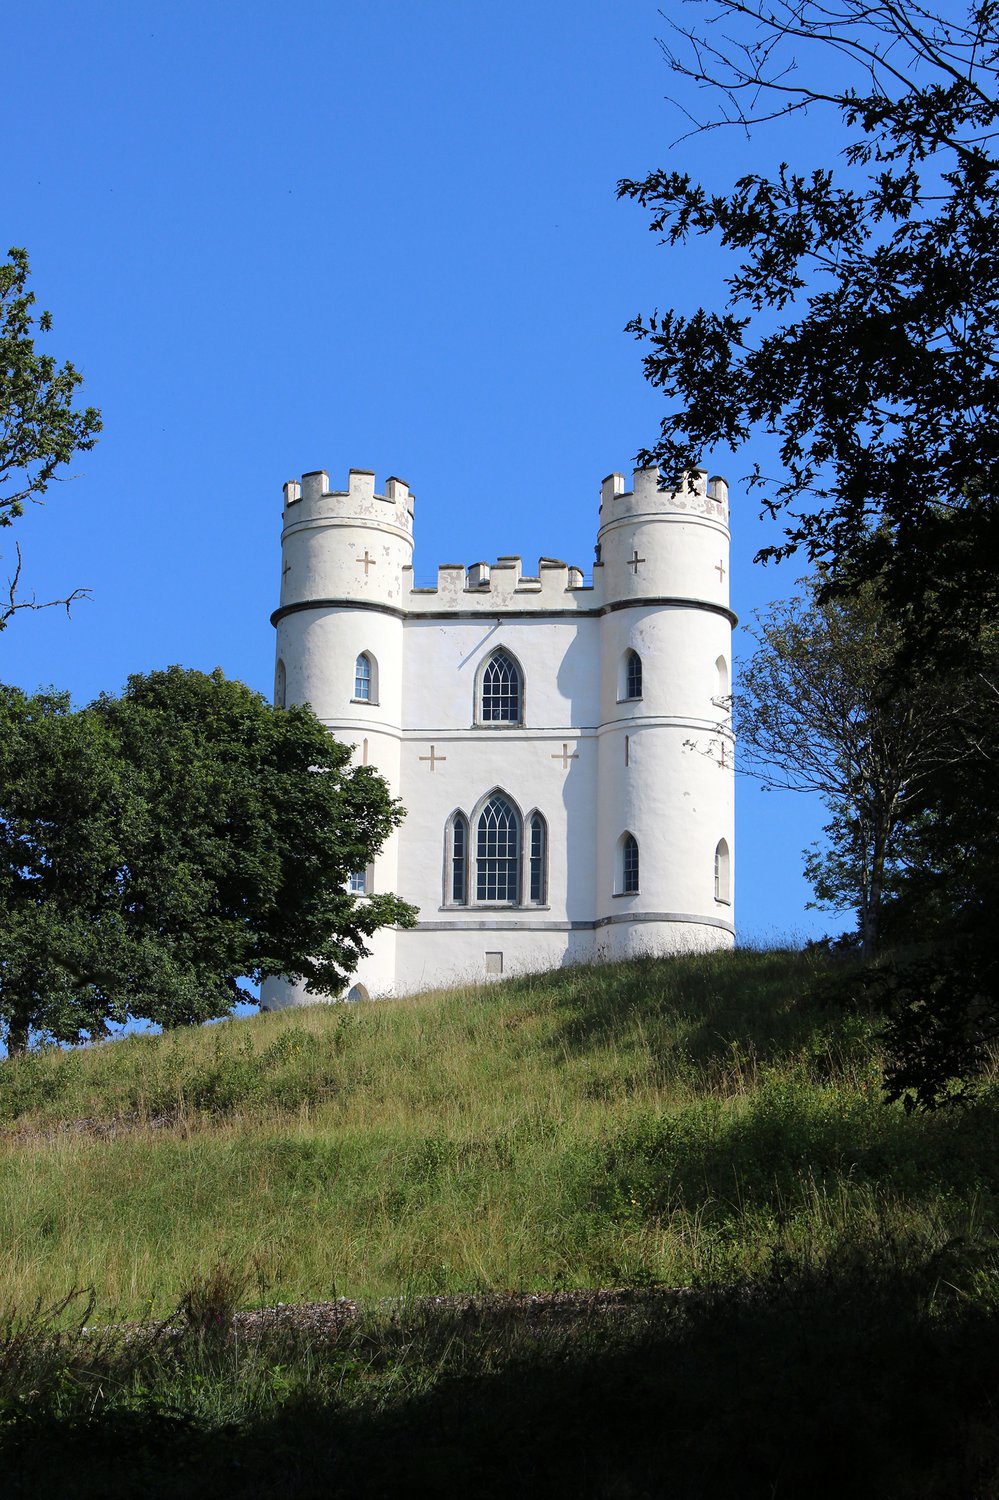 Haldon Belvedere Tower also known as St Lawrence Castlefor